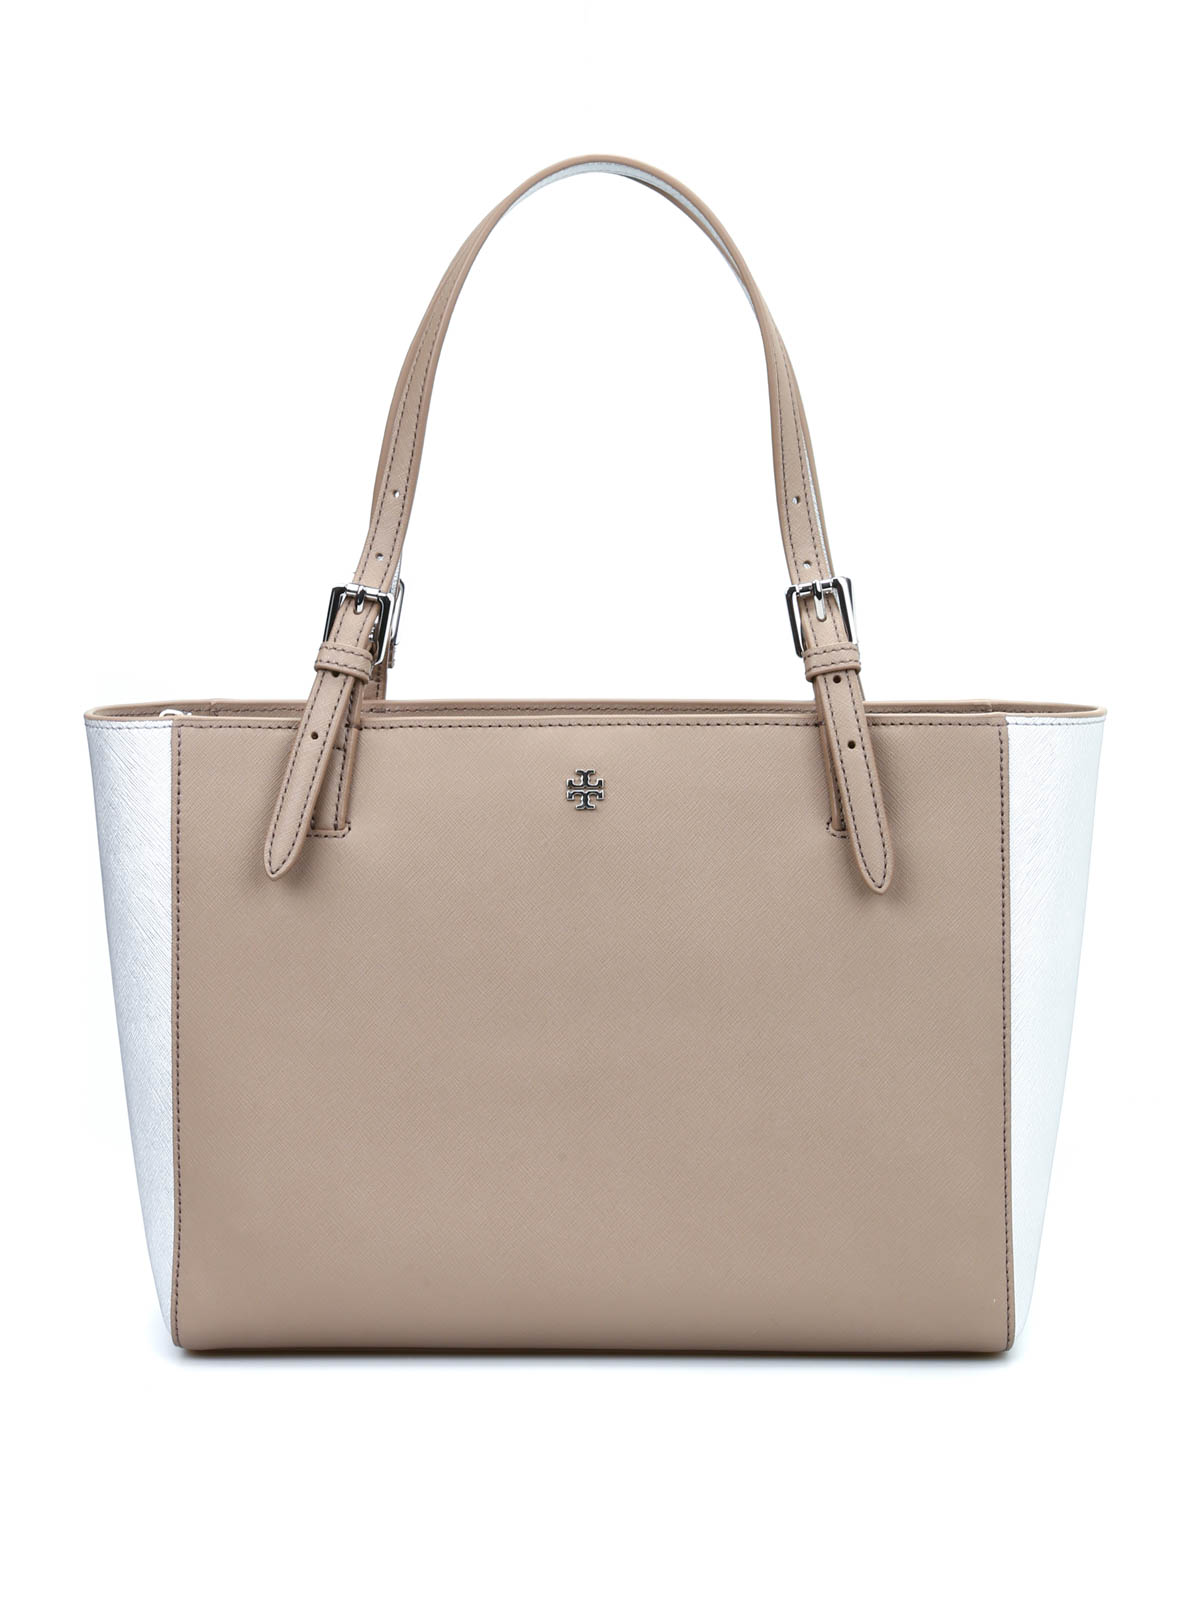 Totes bags Tory Burch - York Saffiano leather tote - 41159802042